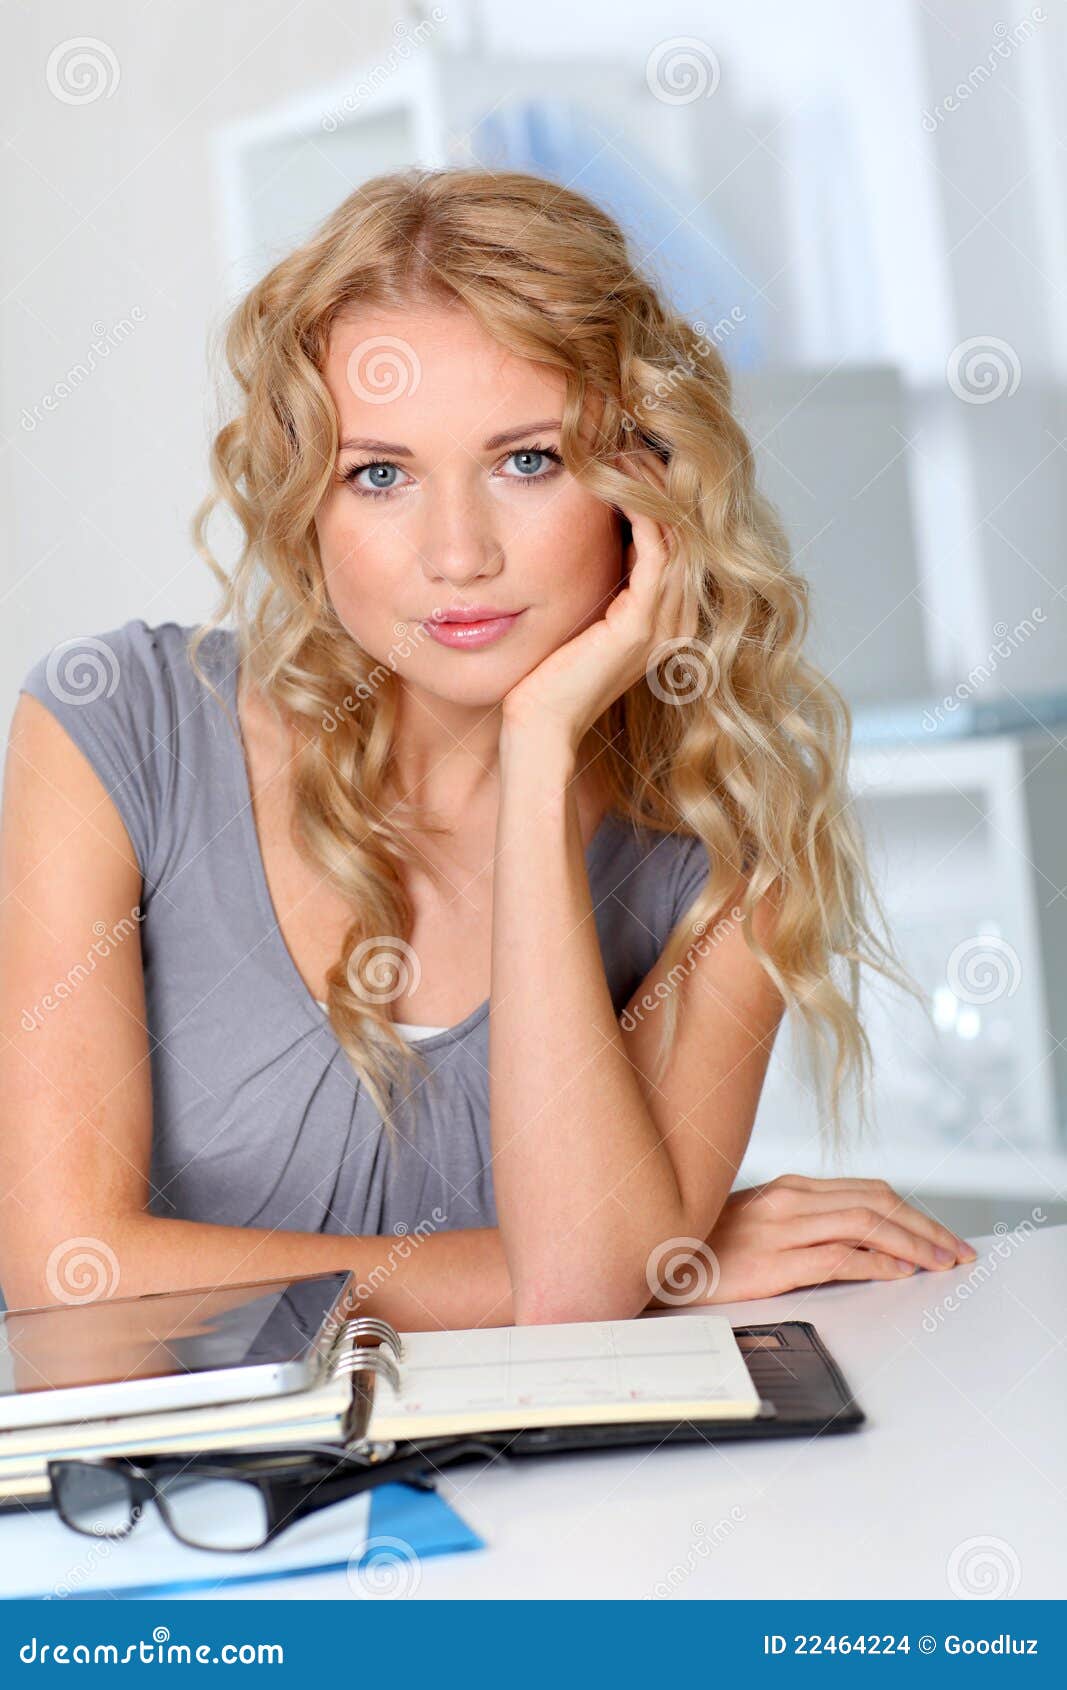 Student blonde. Blond woman Office portrait. Mosgu students blonde. "Blond attractive woman in the Retro Laboratory".